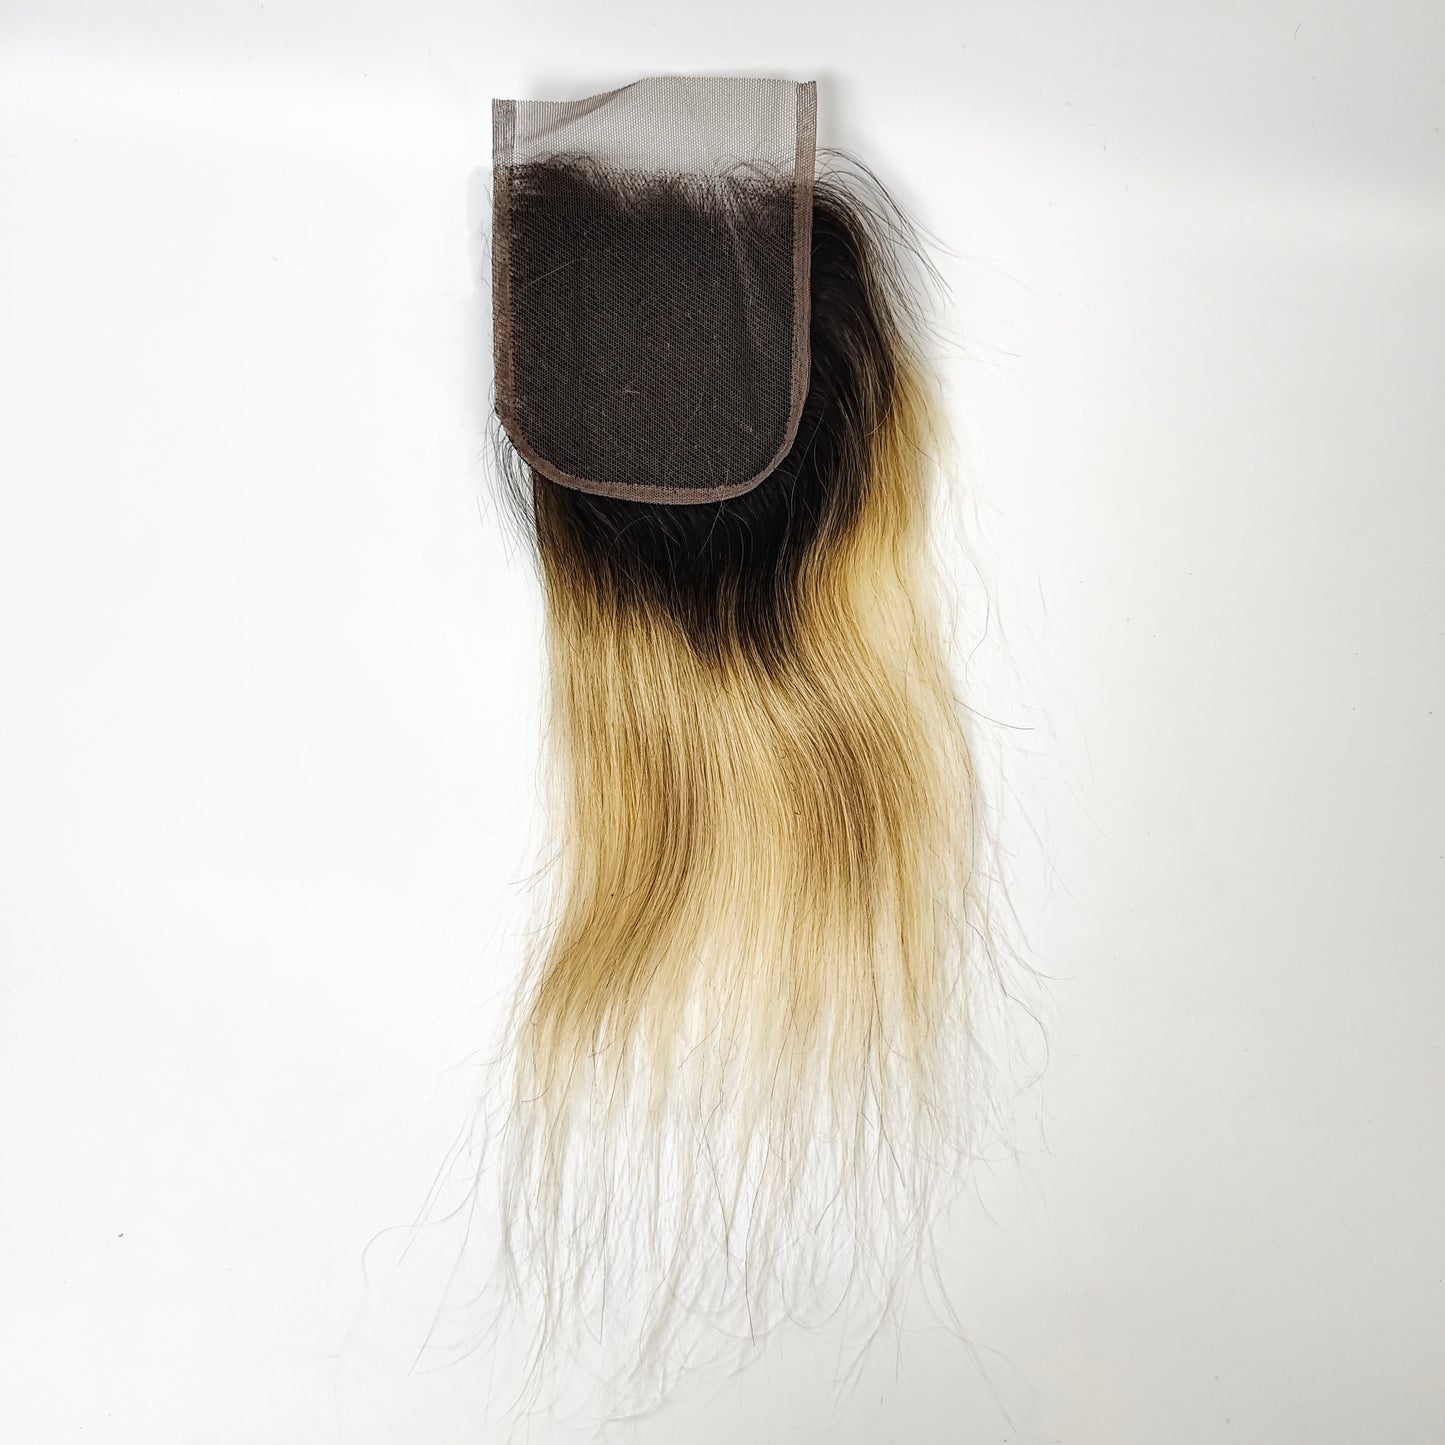 Human Hair Extensions Straight Ombre Human Hair Weft